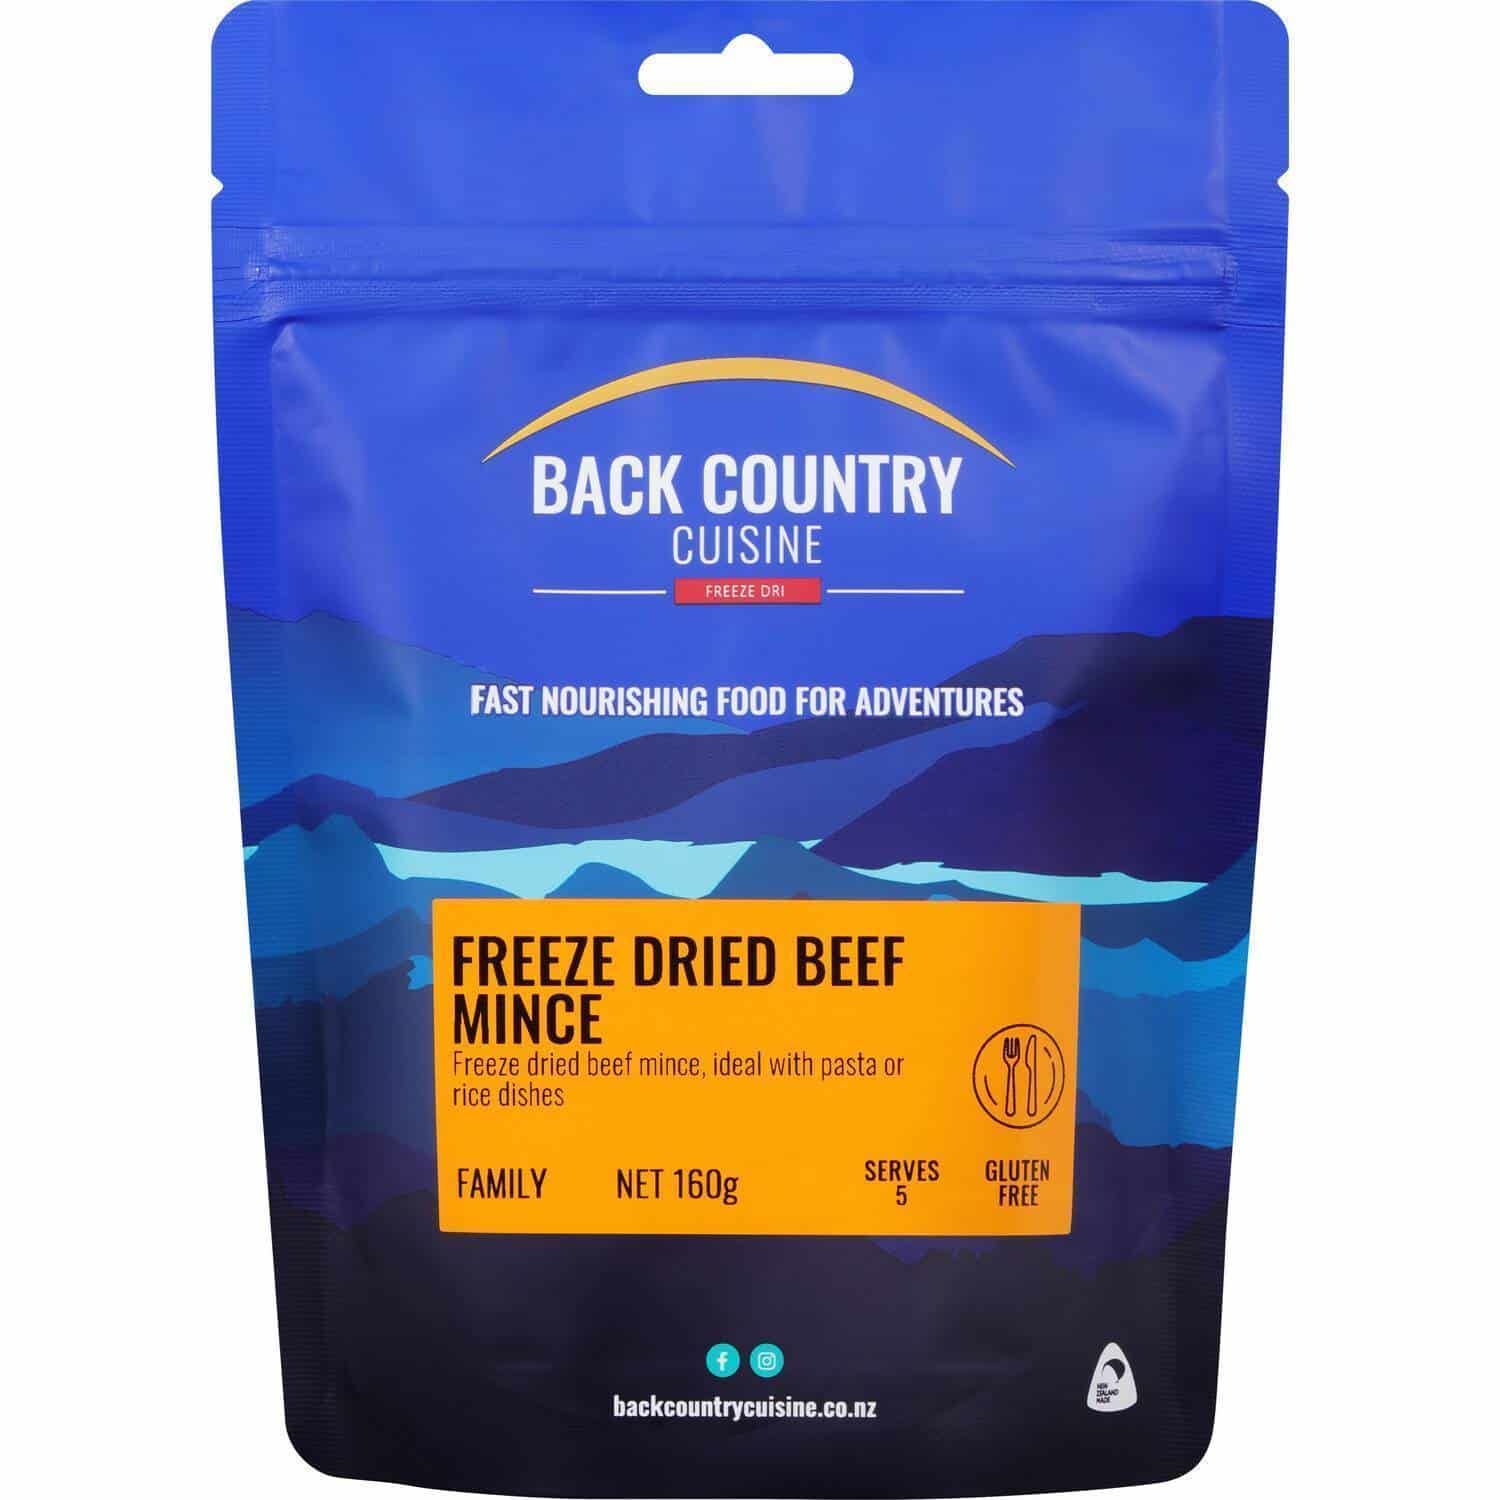 Back Country Cuisine Instant Beef Mince - Tramping Food and Accessories sold by Venture Outdoors NZ